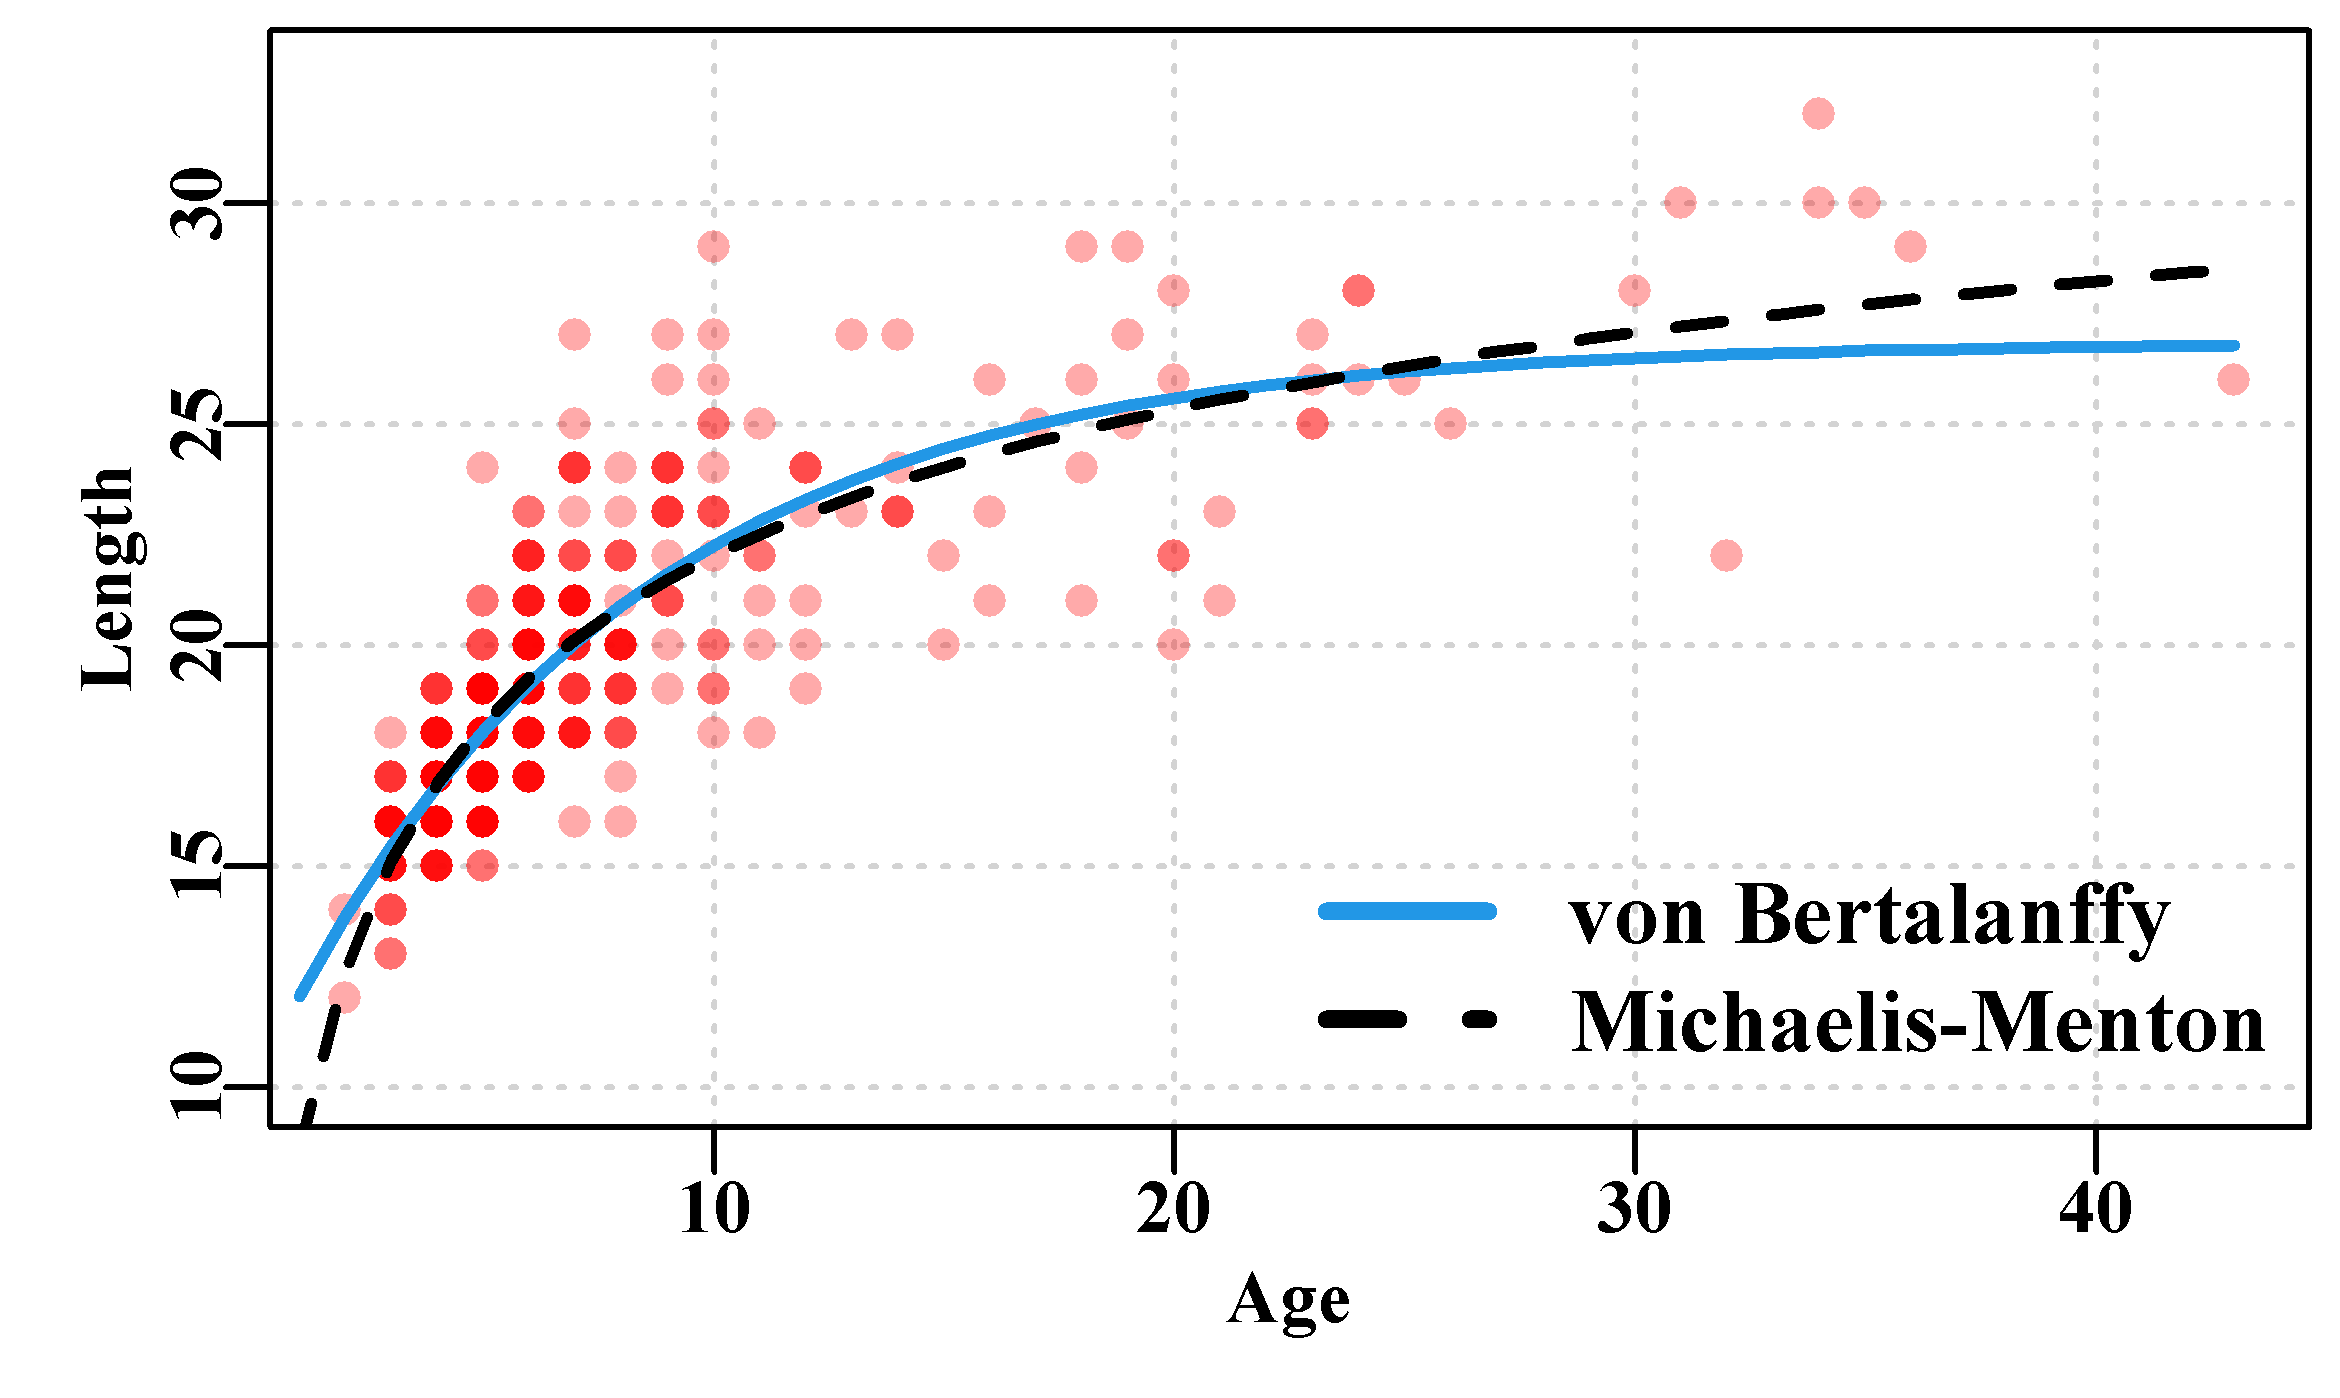 Optimum von Bertalanffy and Michaelis-Menton growth curves fitted to the female LatA Redfish data. Note the two curves are effectively coincident where the observations are most concentrated. Note the y-axis starts at 10.